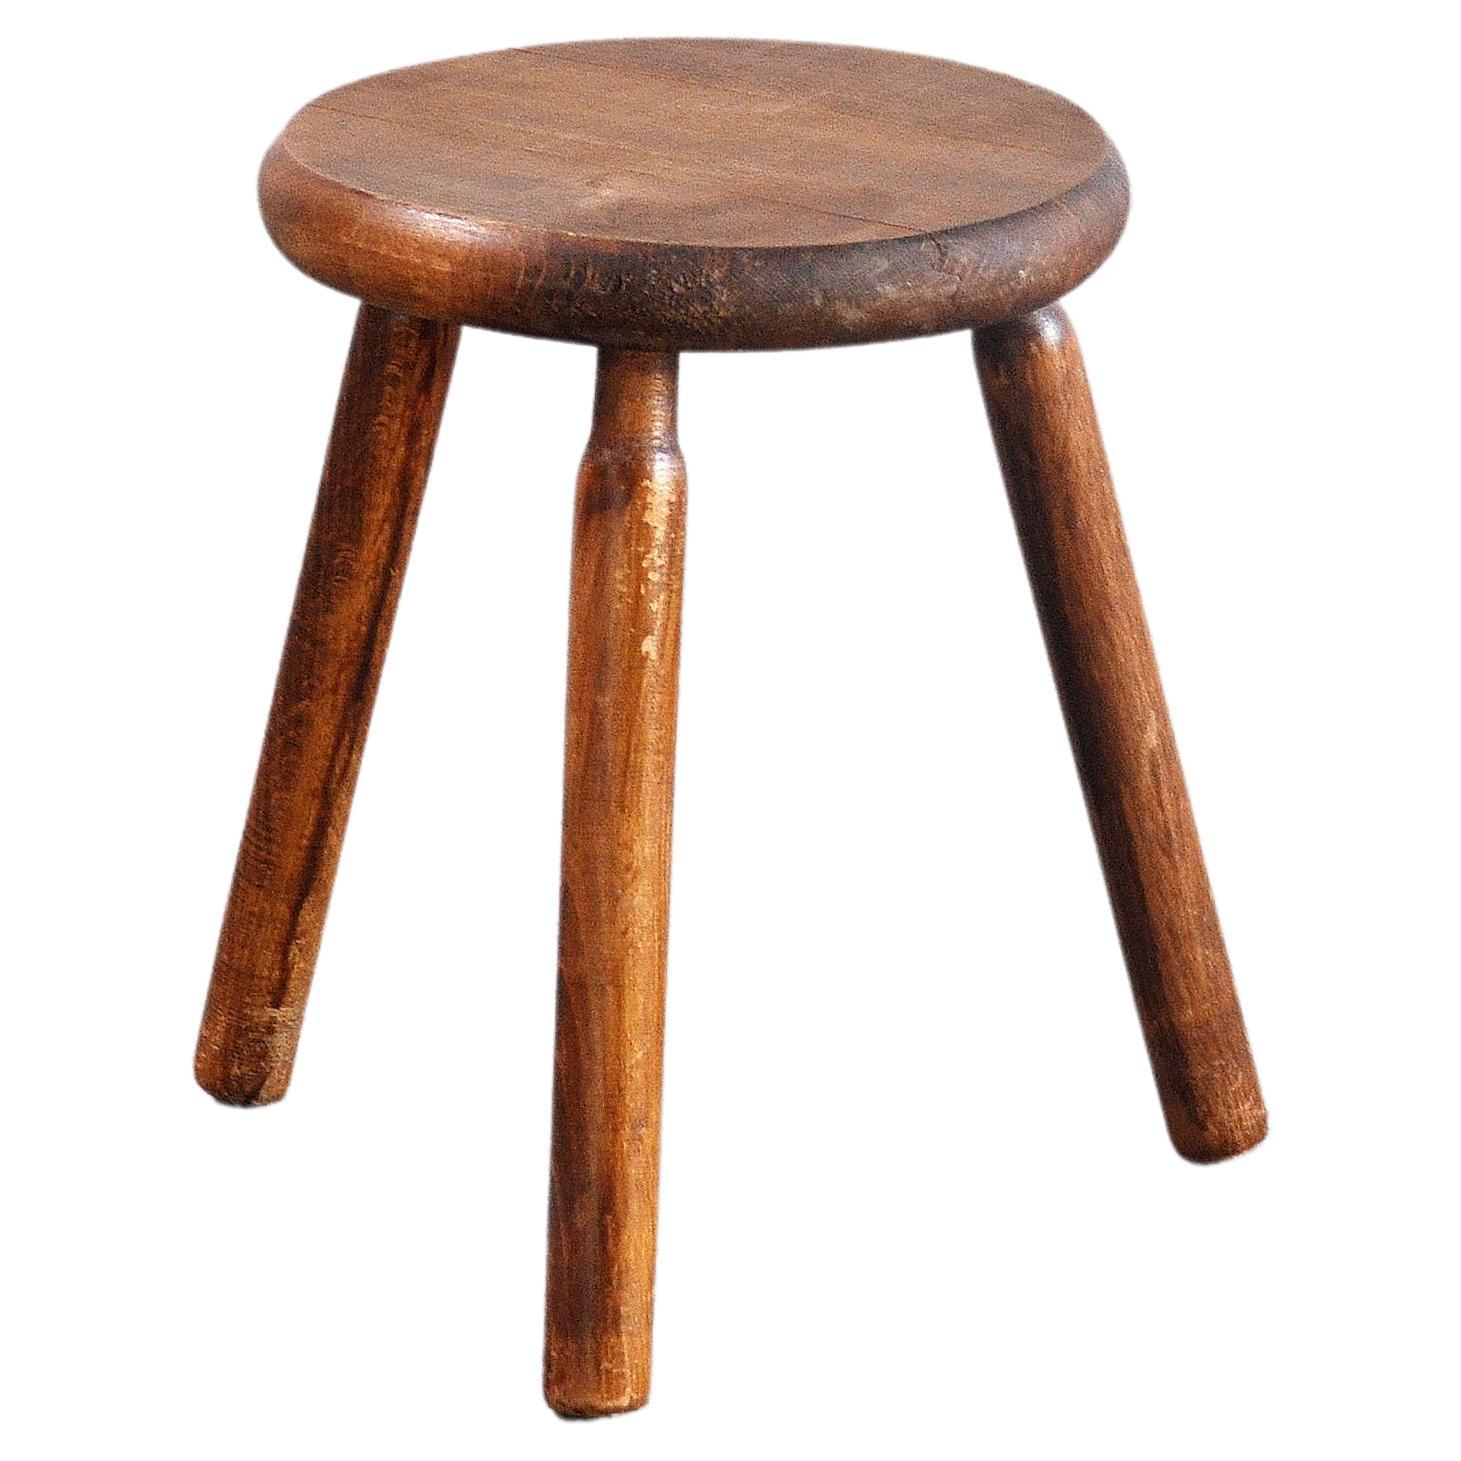 Vintage Stool in the Manner of Charlotte Perriand, France, Mid-20th Century For Sale